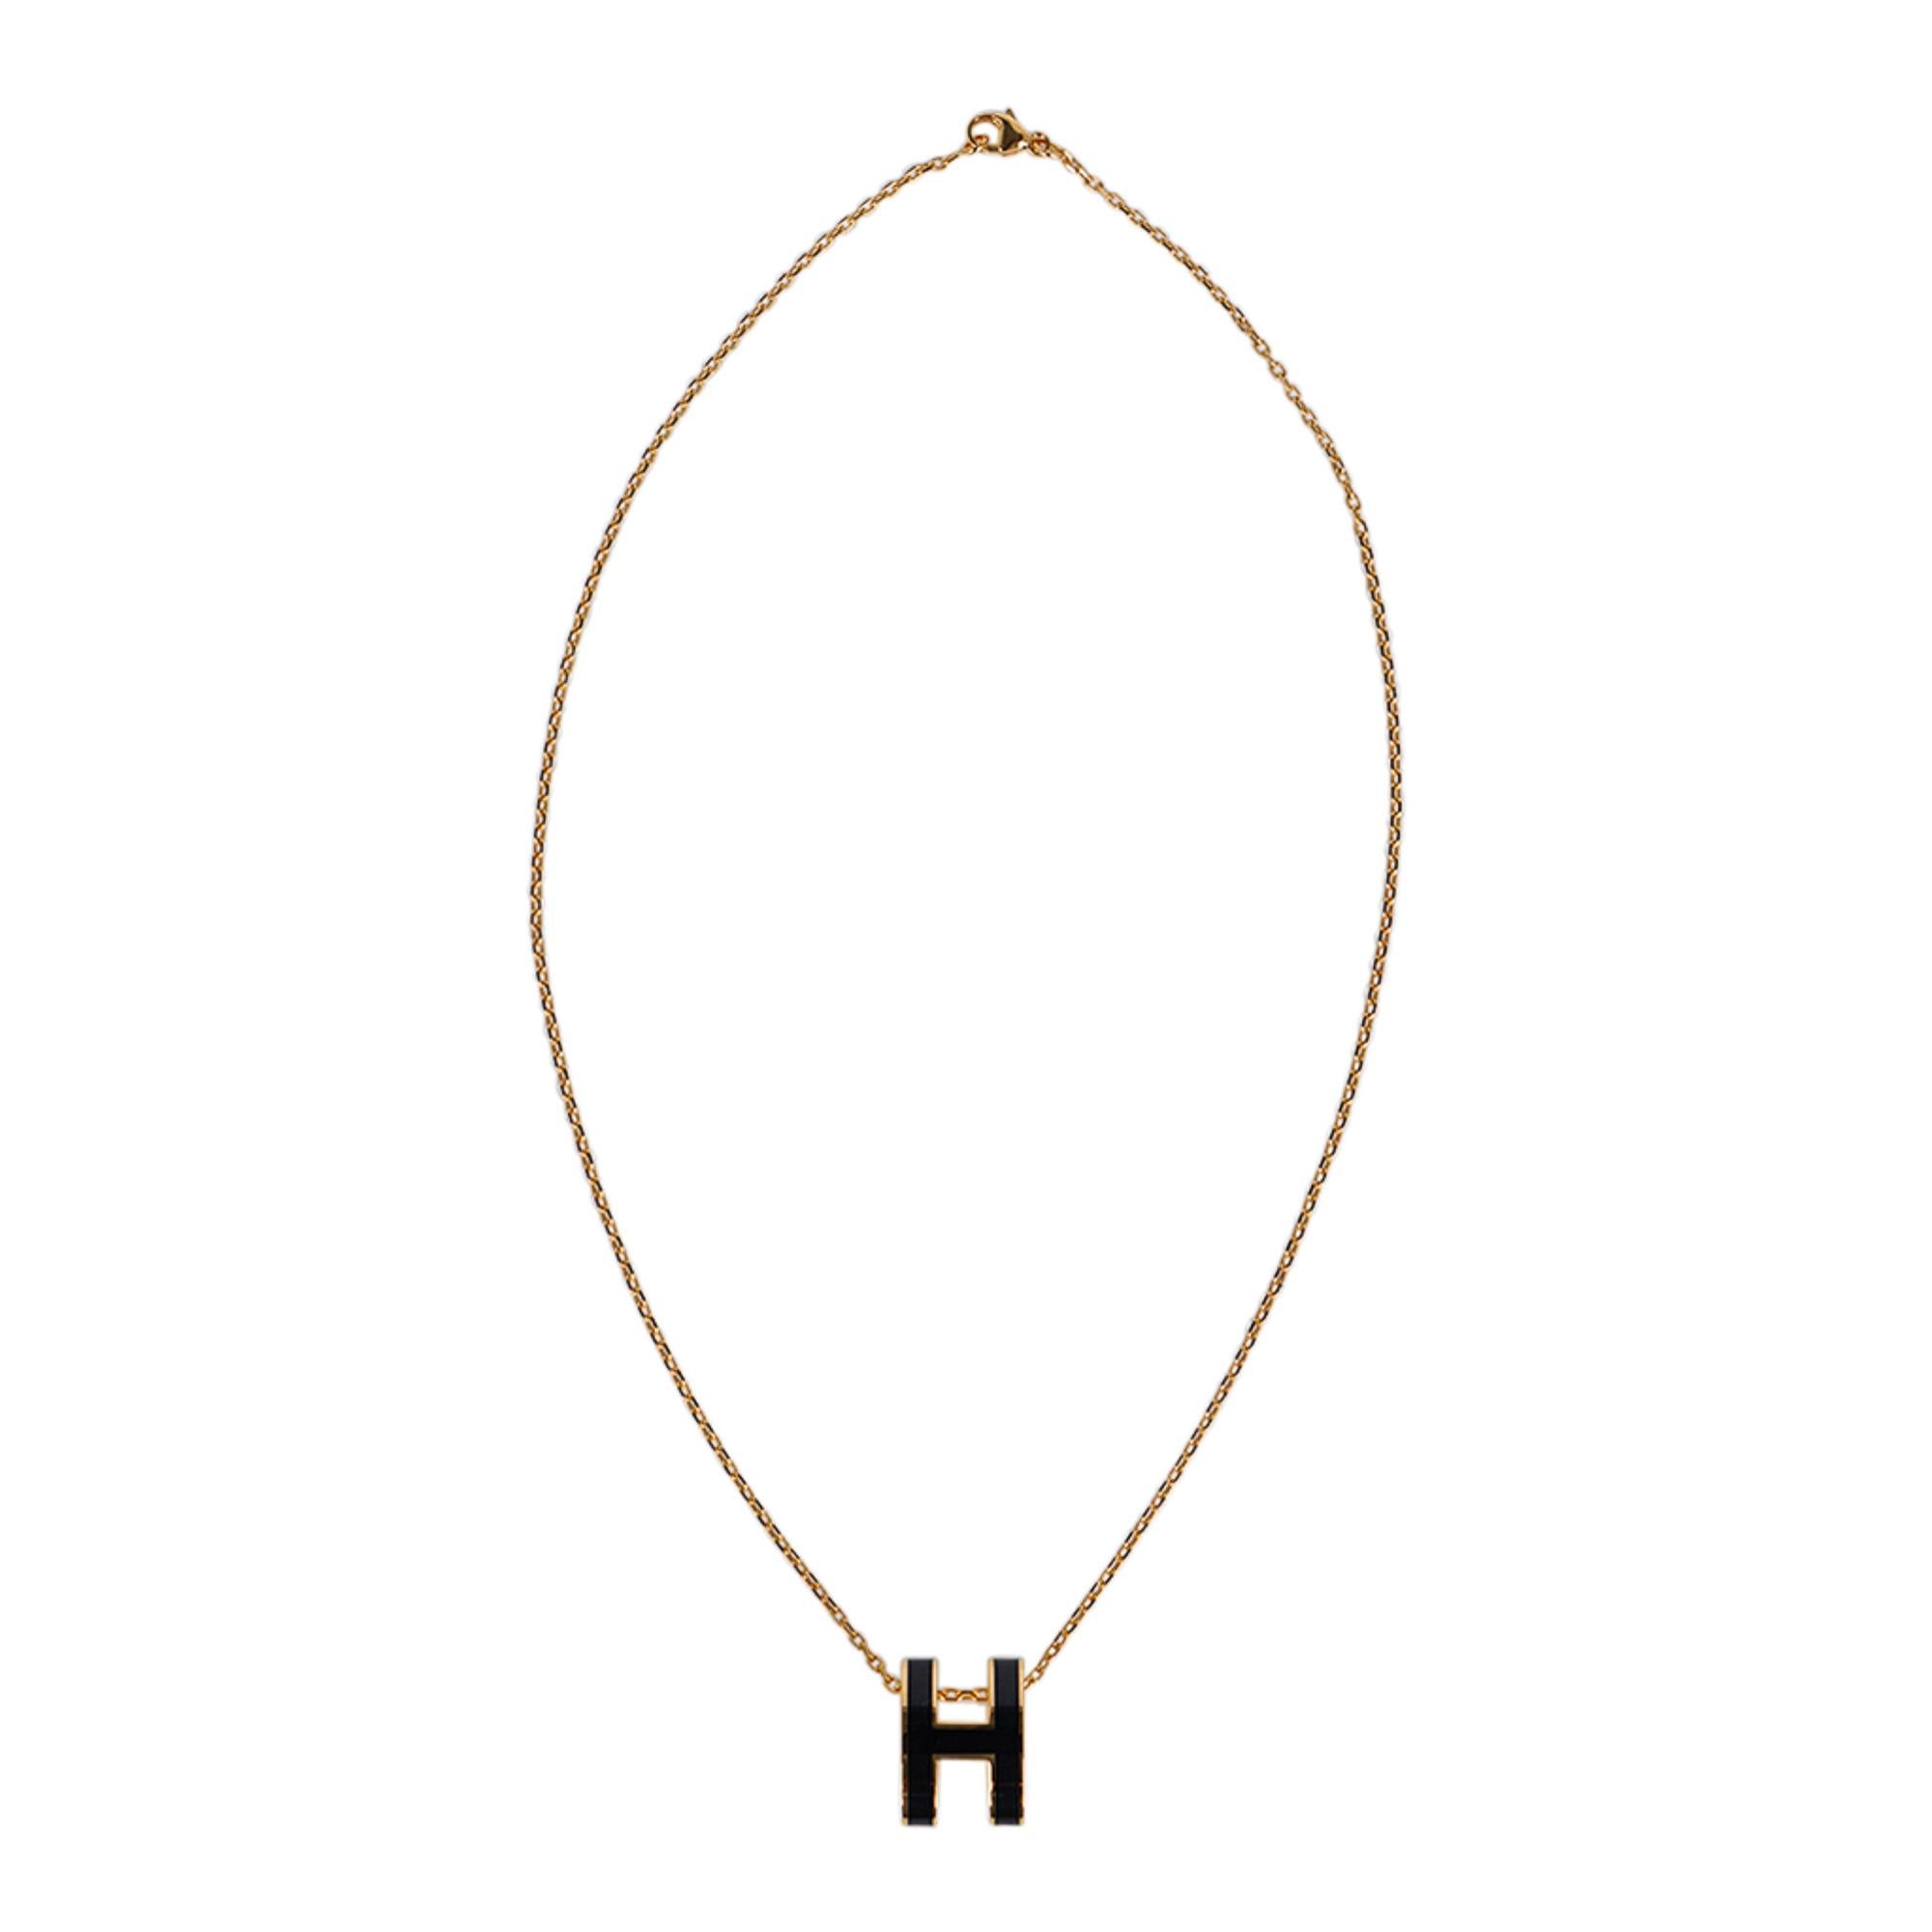 Mightychic offers a Mini Hermes Pop H Necklace featured in Black lacquered metal.
Pop H pendant on 16